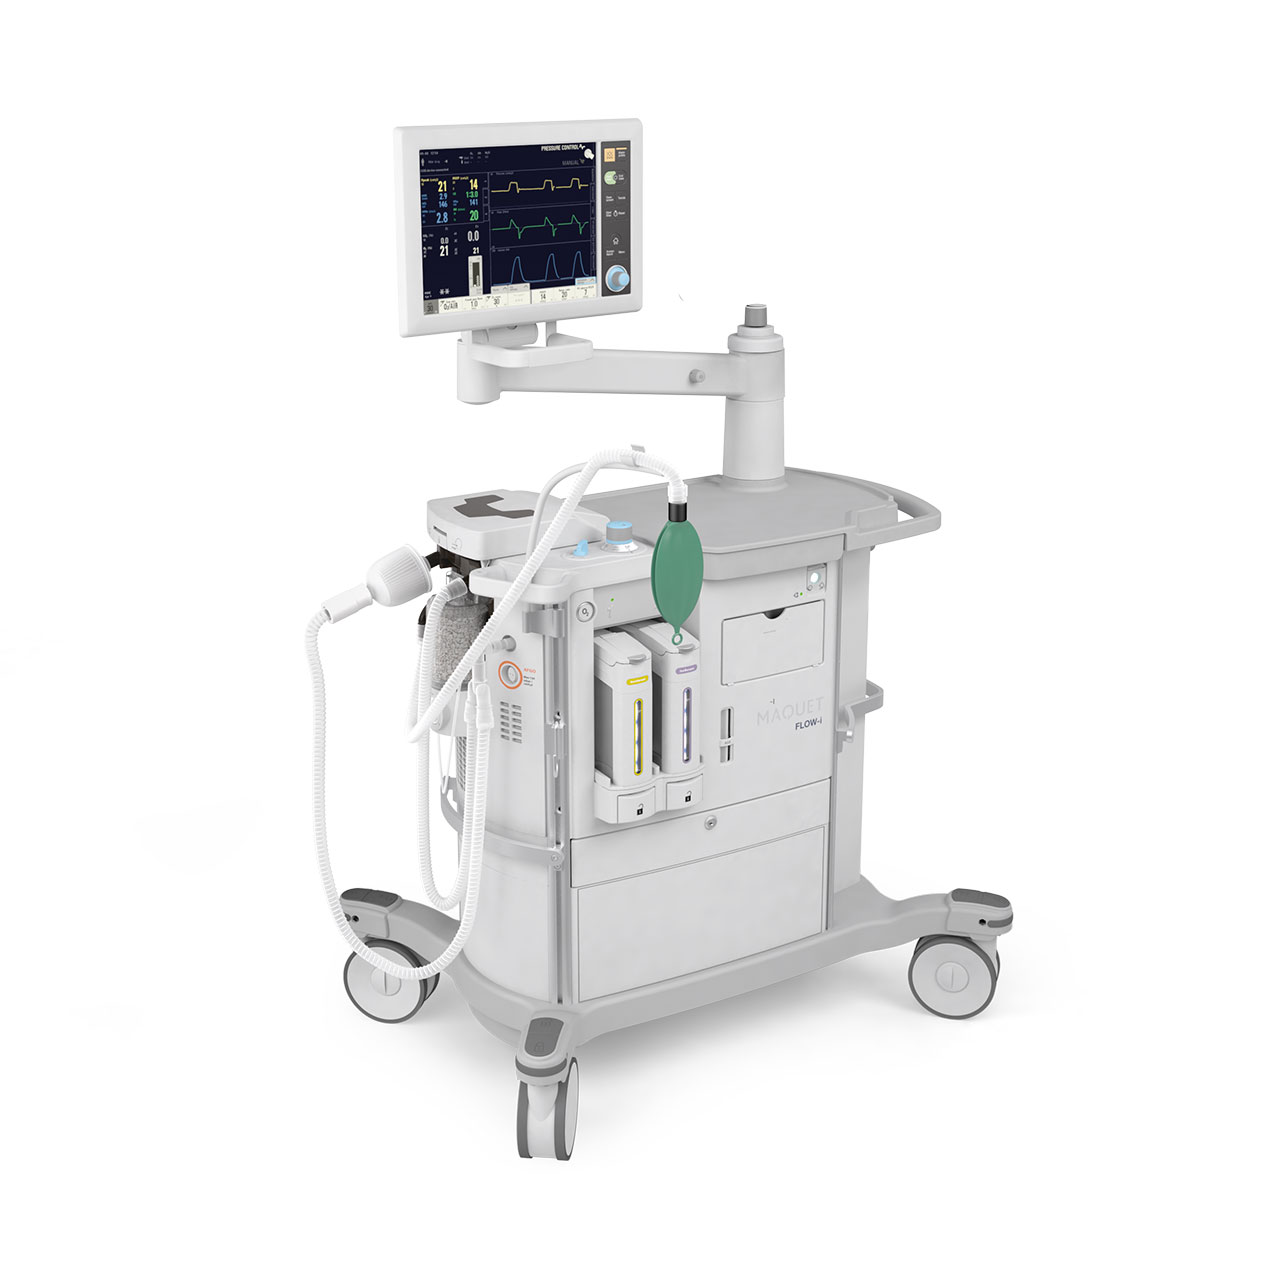 Getinge Flow-i anesthesia machine provides safe, personalized and cost-efficient care for the most challenging patients.